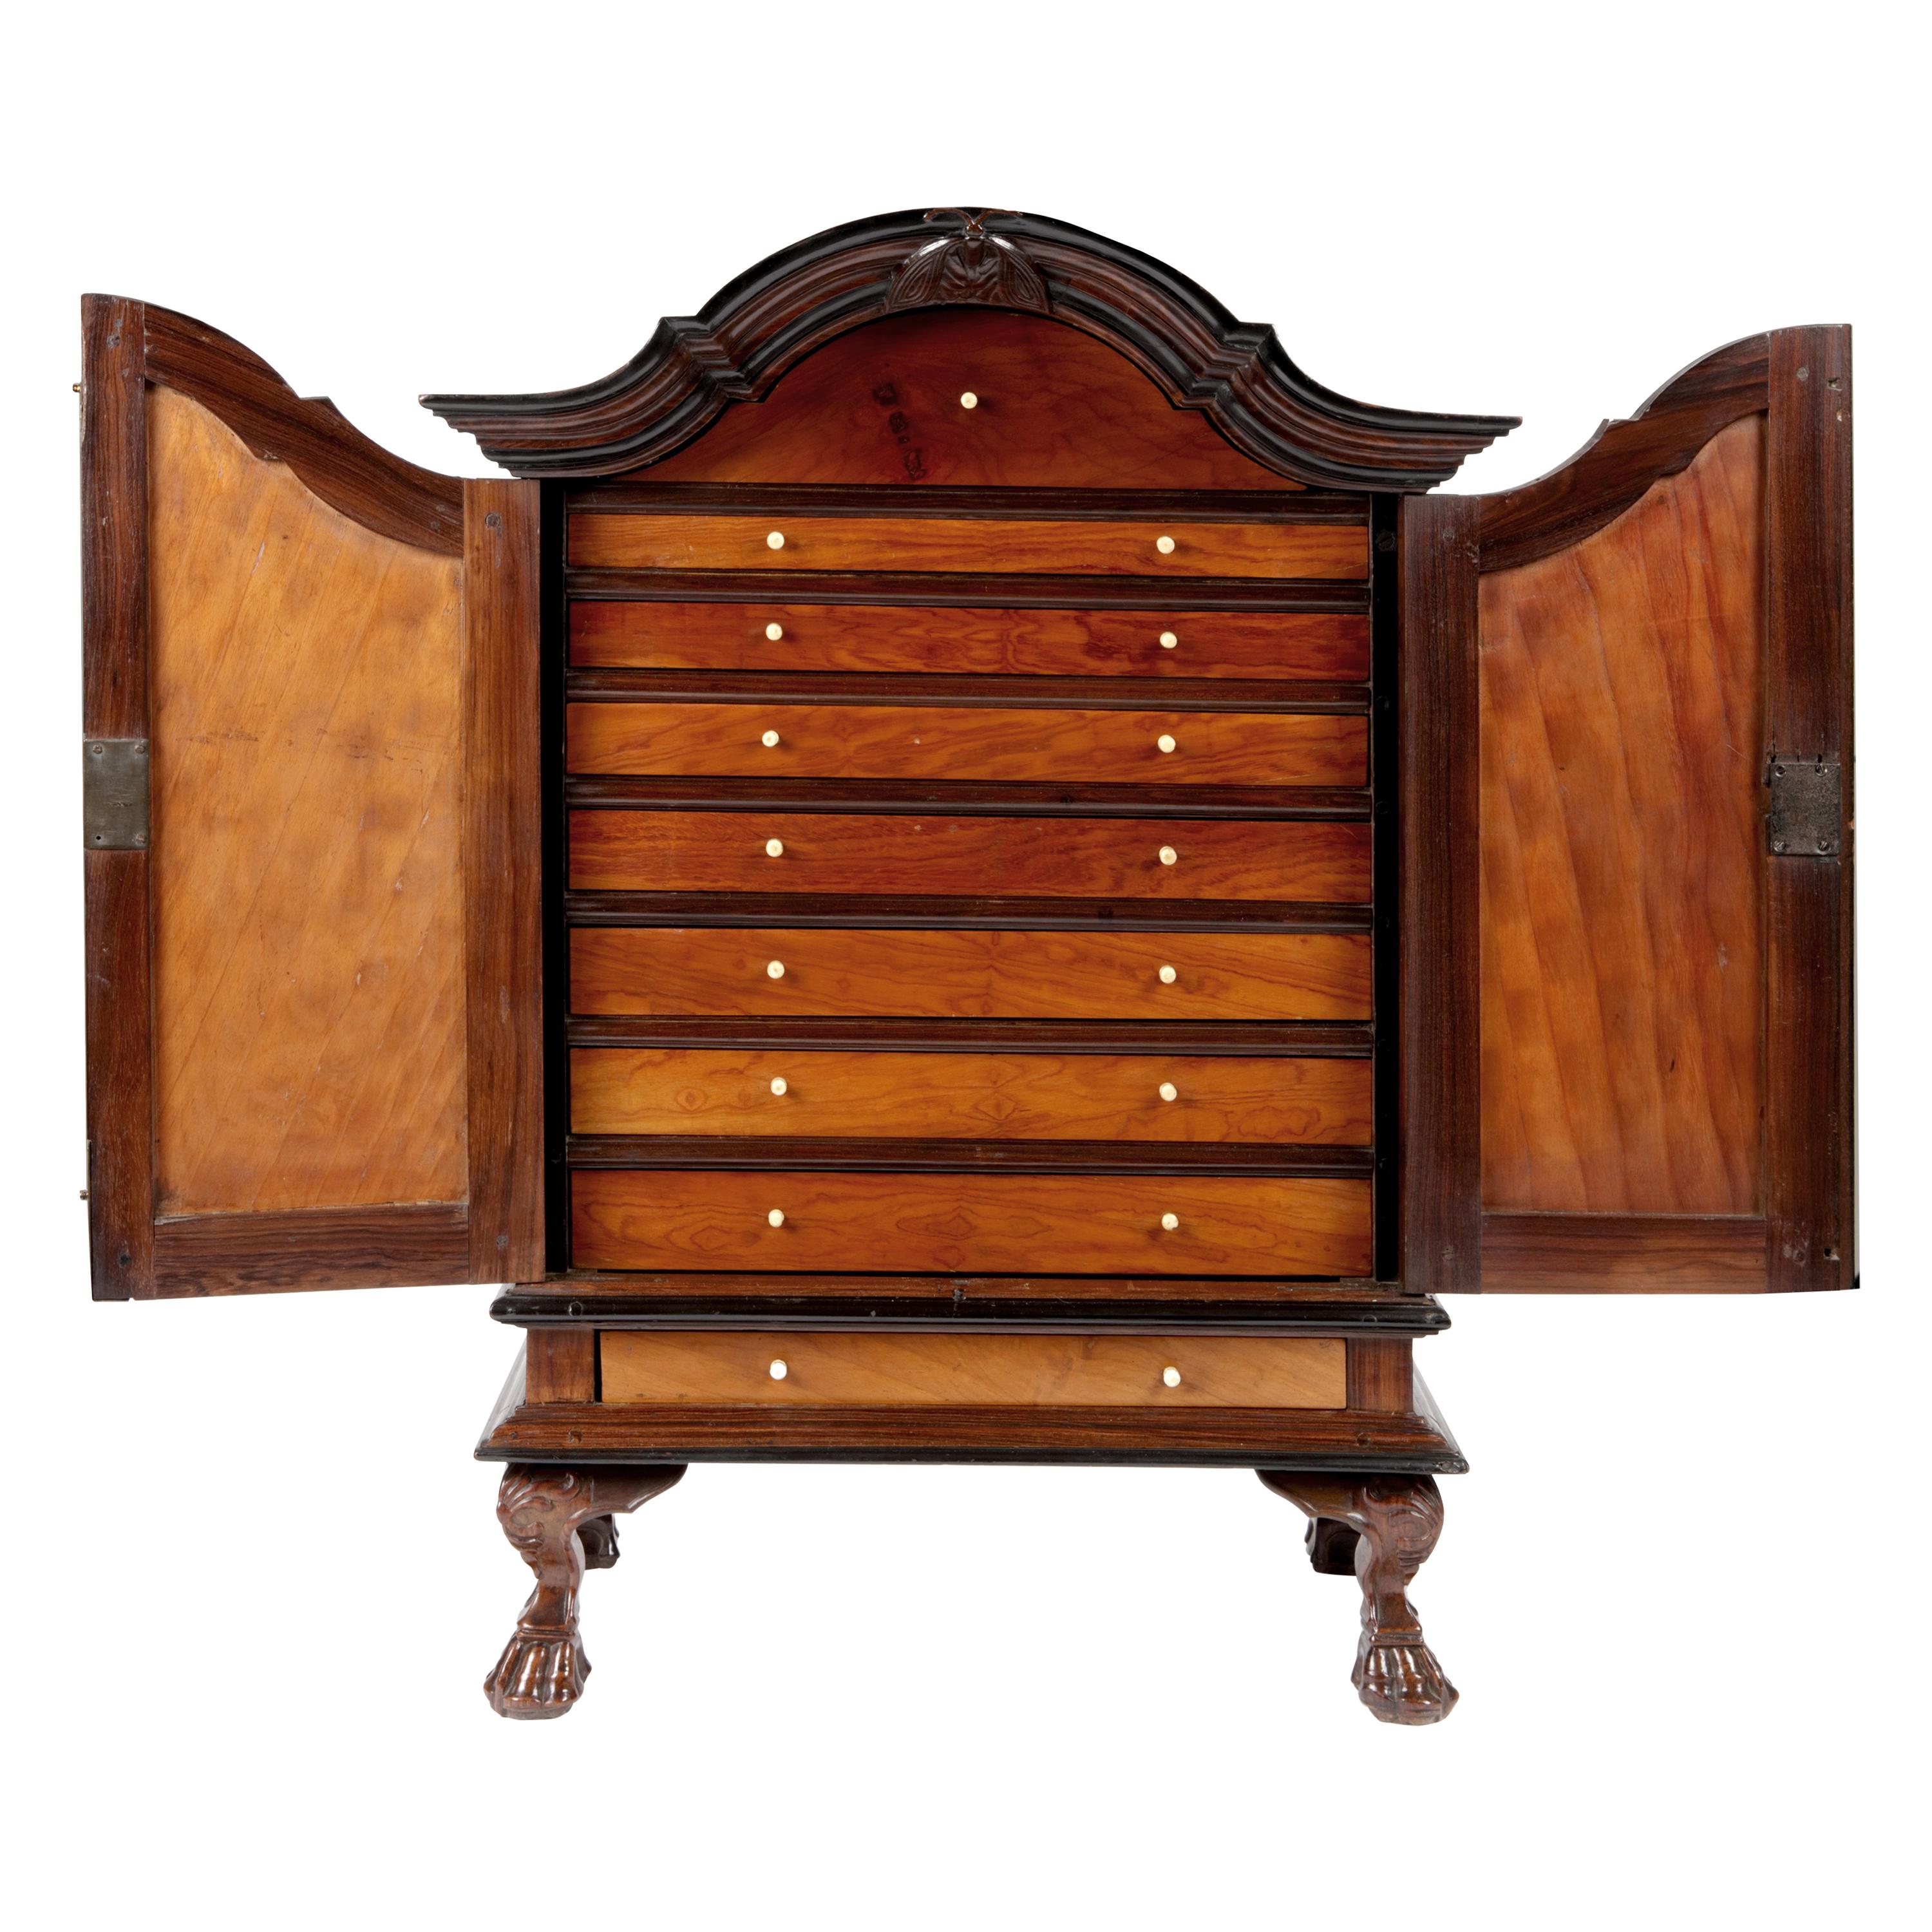 Dutch-Colonial Satin and Rosewood, Ebony and Teak Collectors’ Table-Cabinet